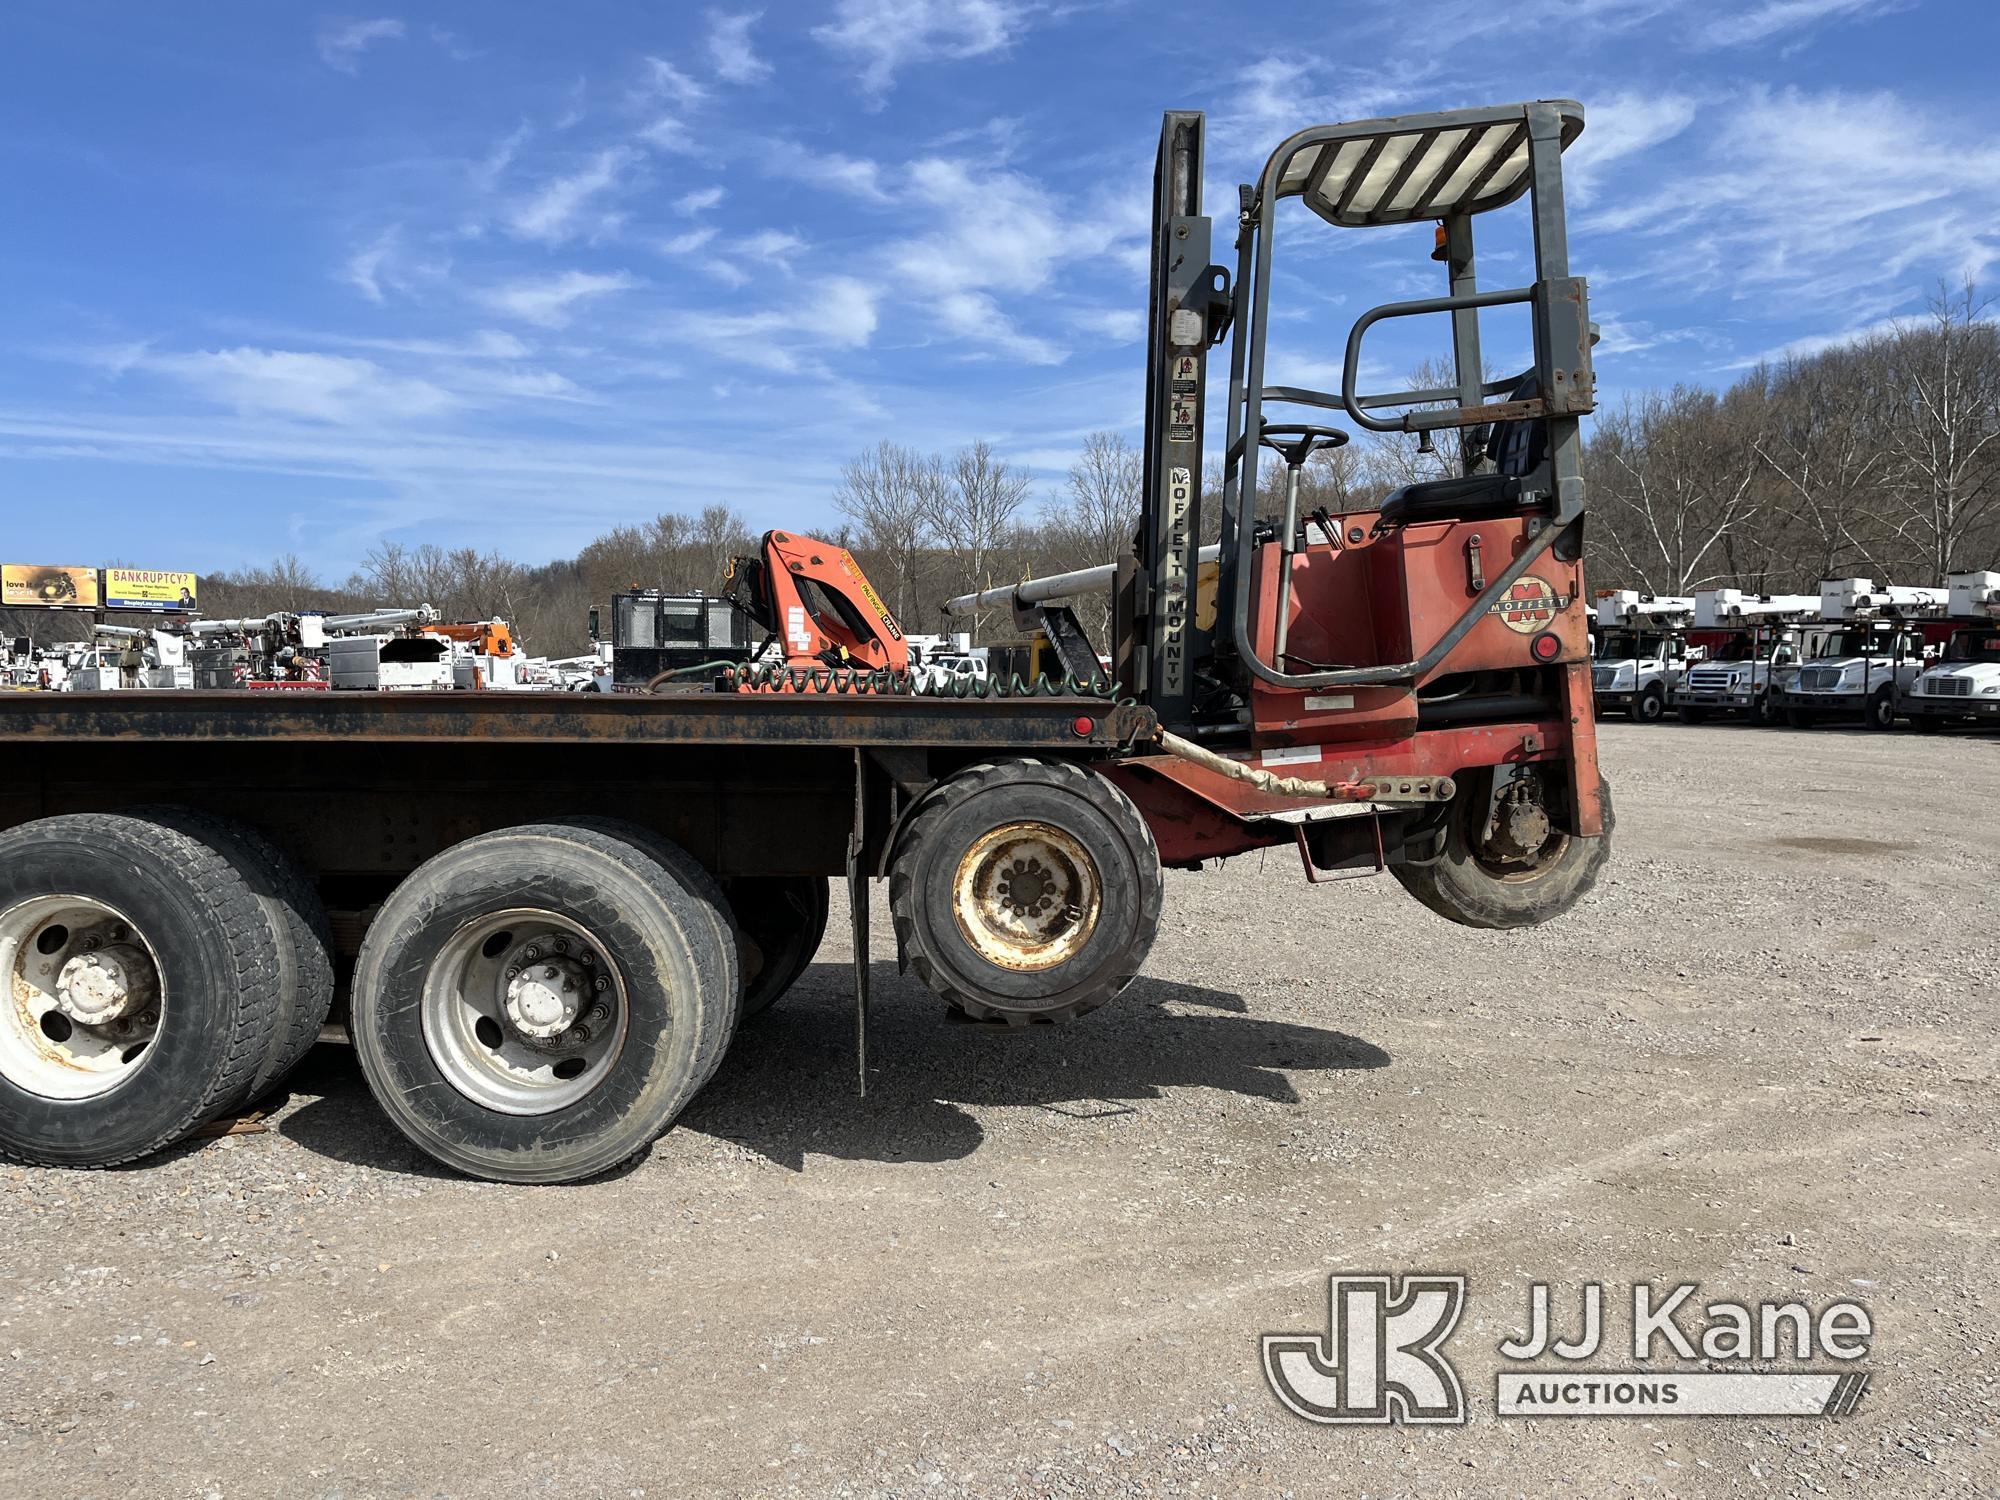 (Smock, PA) 2001 Chevrolet C7H064 Flatbed Truck Runs, Moves & Forklift Operates, Rust Damage